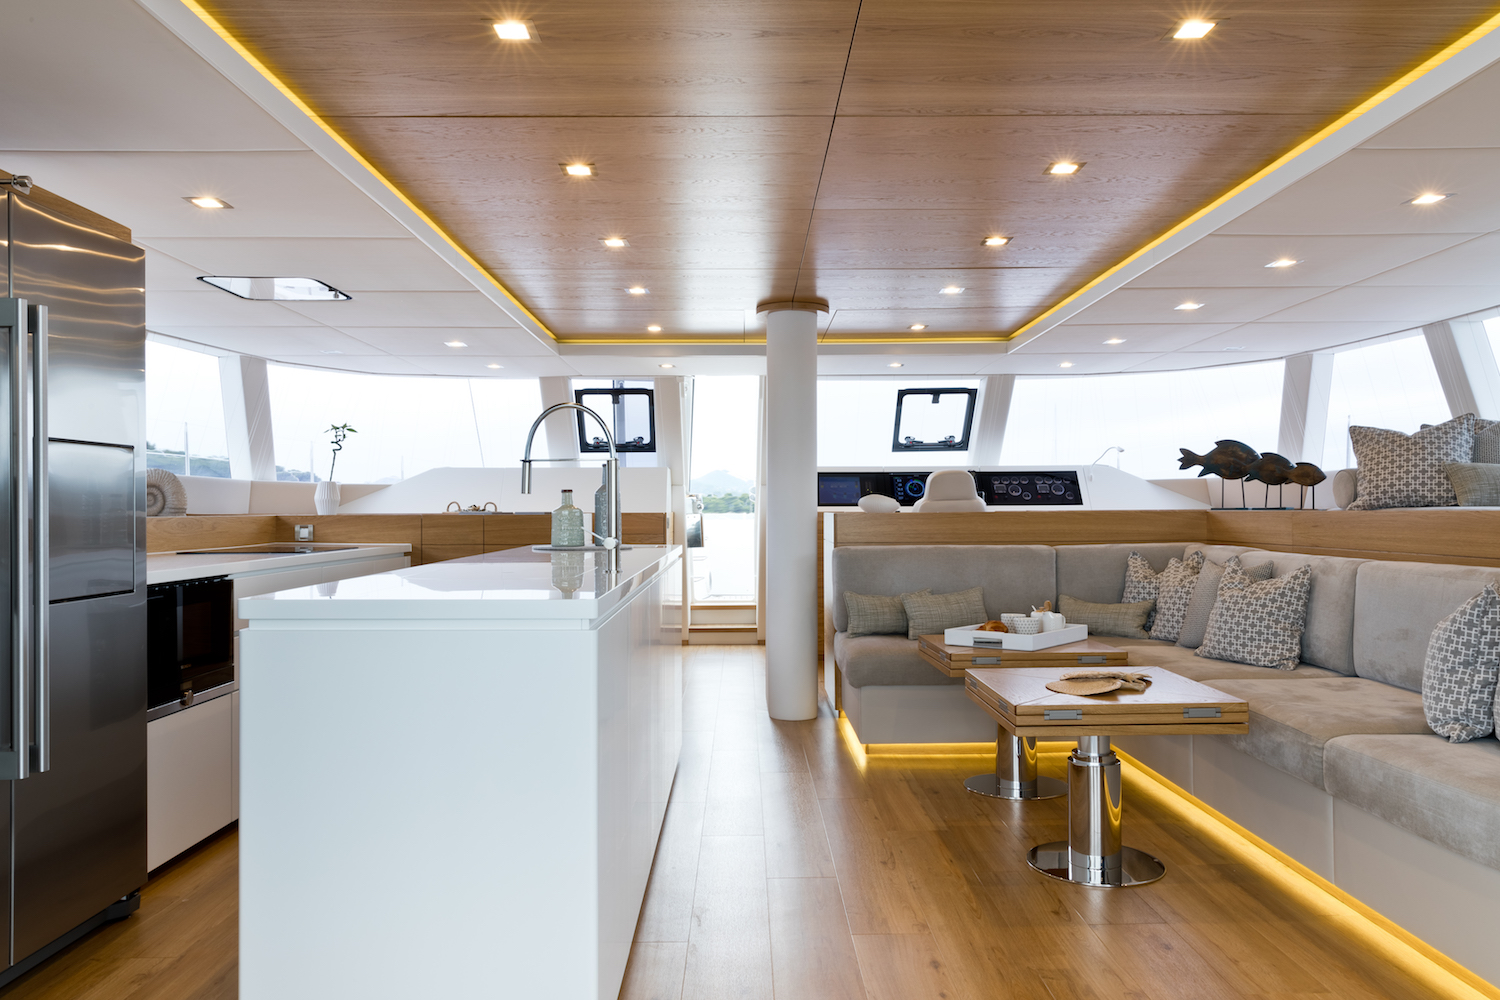 Galley And Seating Area